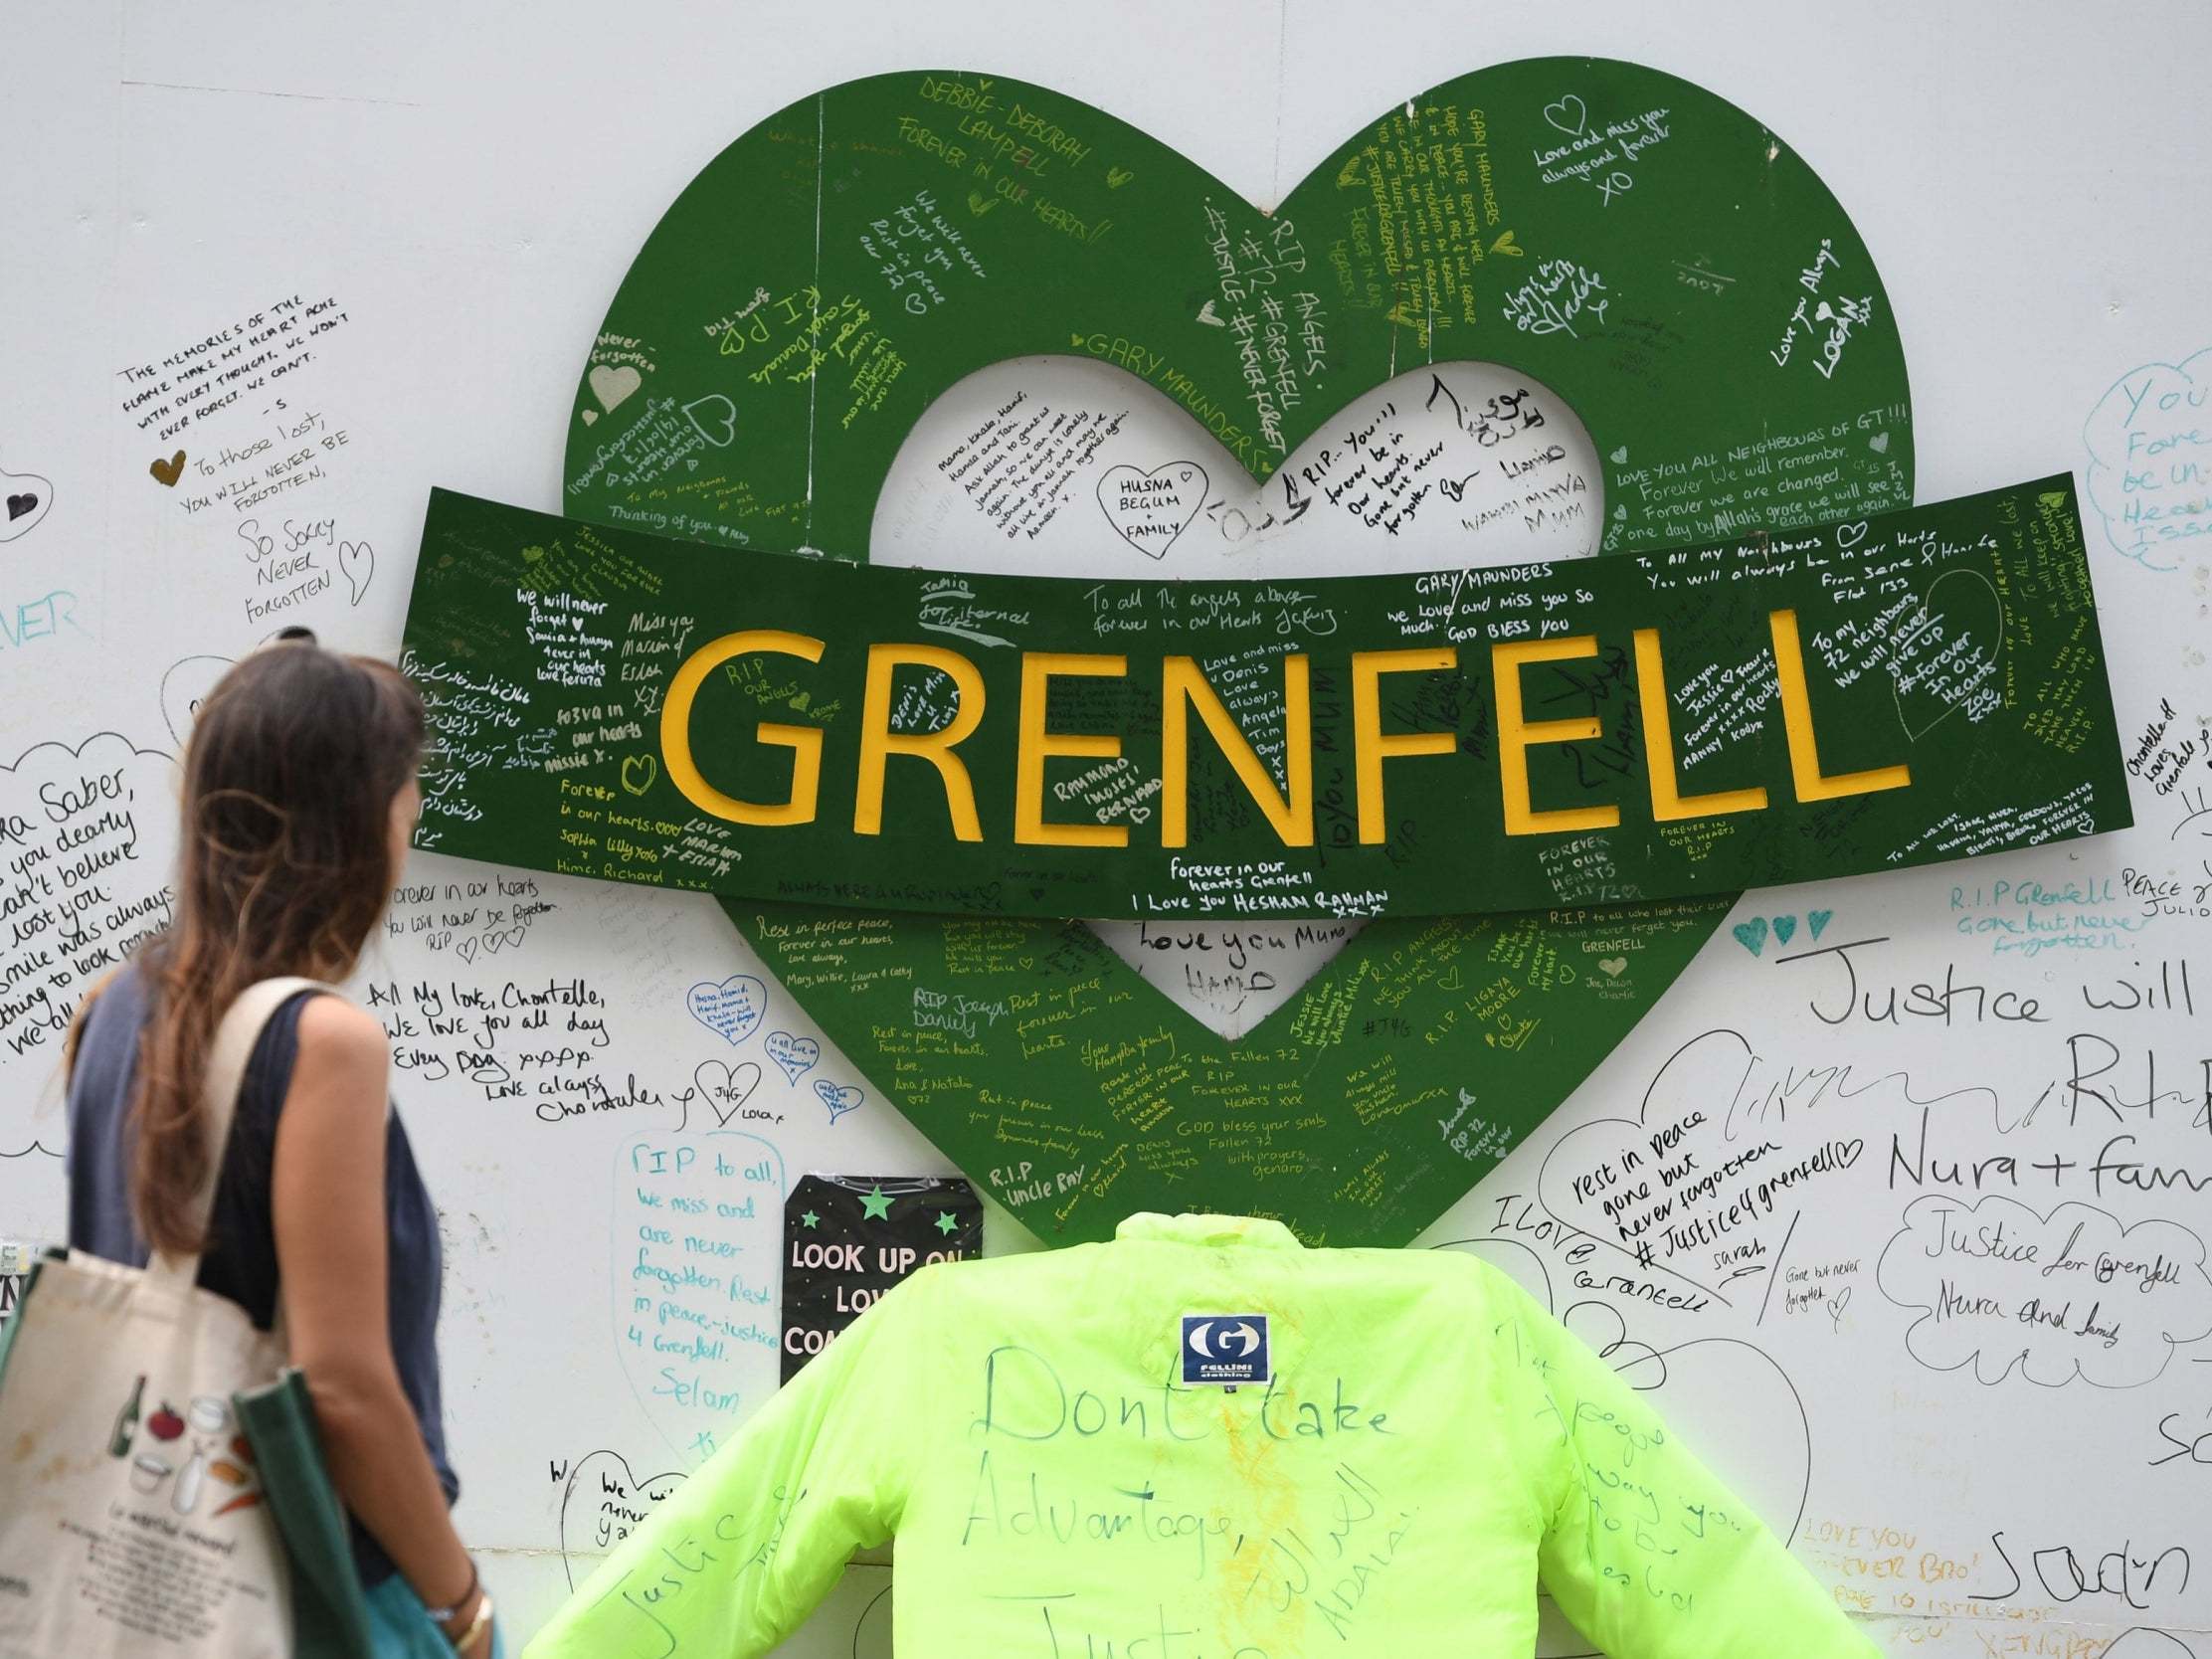 Related video: Keir Starmer says three years on from Grenfell fire there has been 'little justice or accountability'